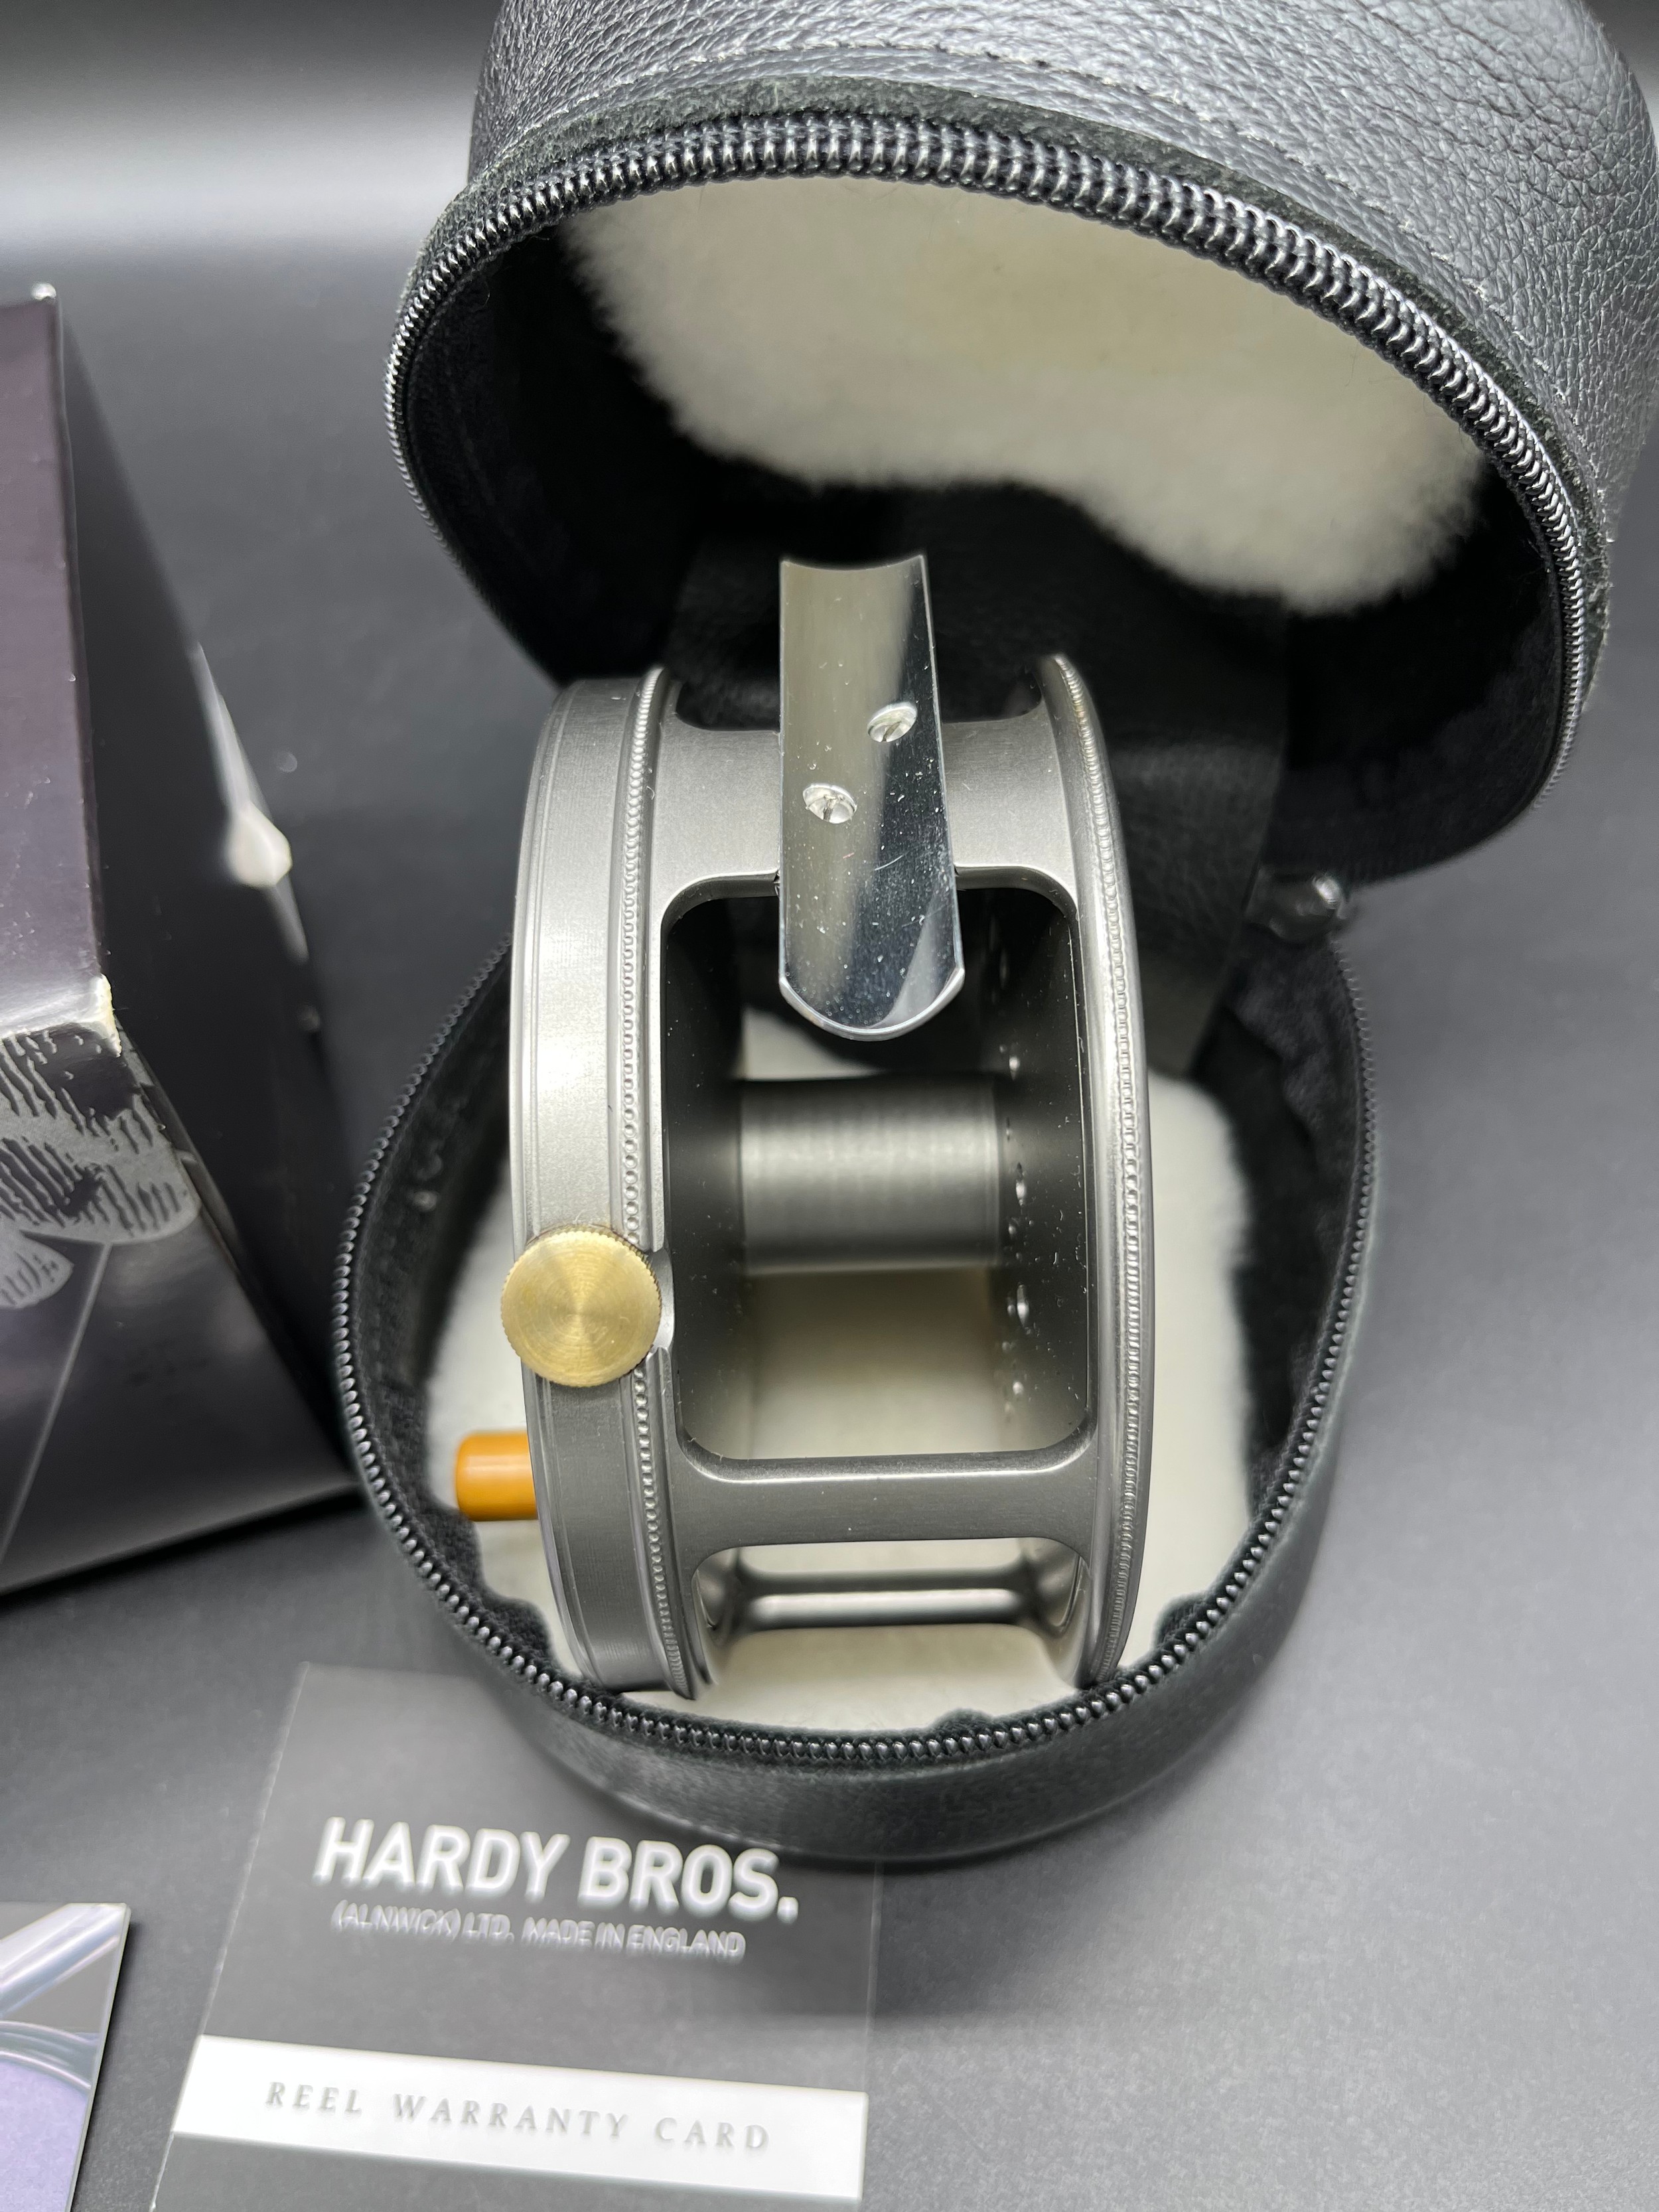 Hardy Bros. The 'Perfect' 4 1/4" Wide Spool fly reel. Mint condition. Comes with bag, box and - Image 4 of 6